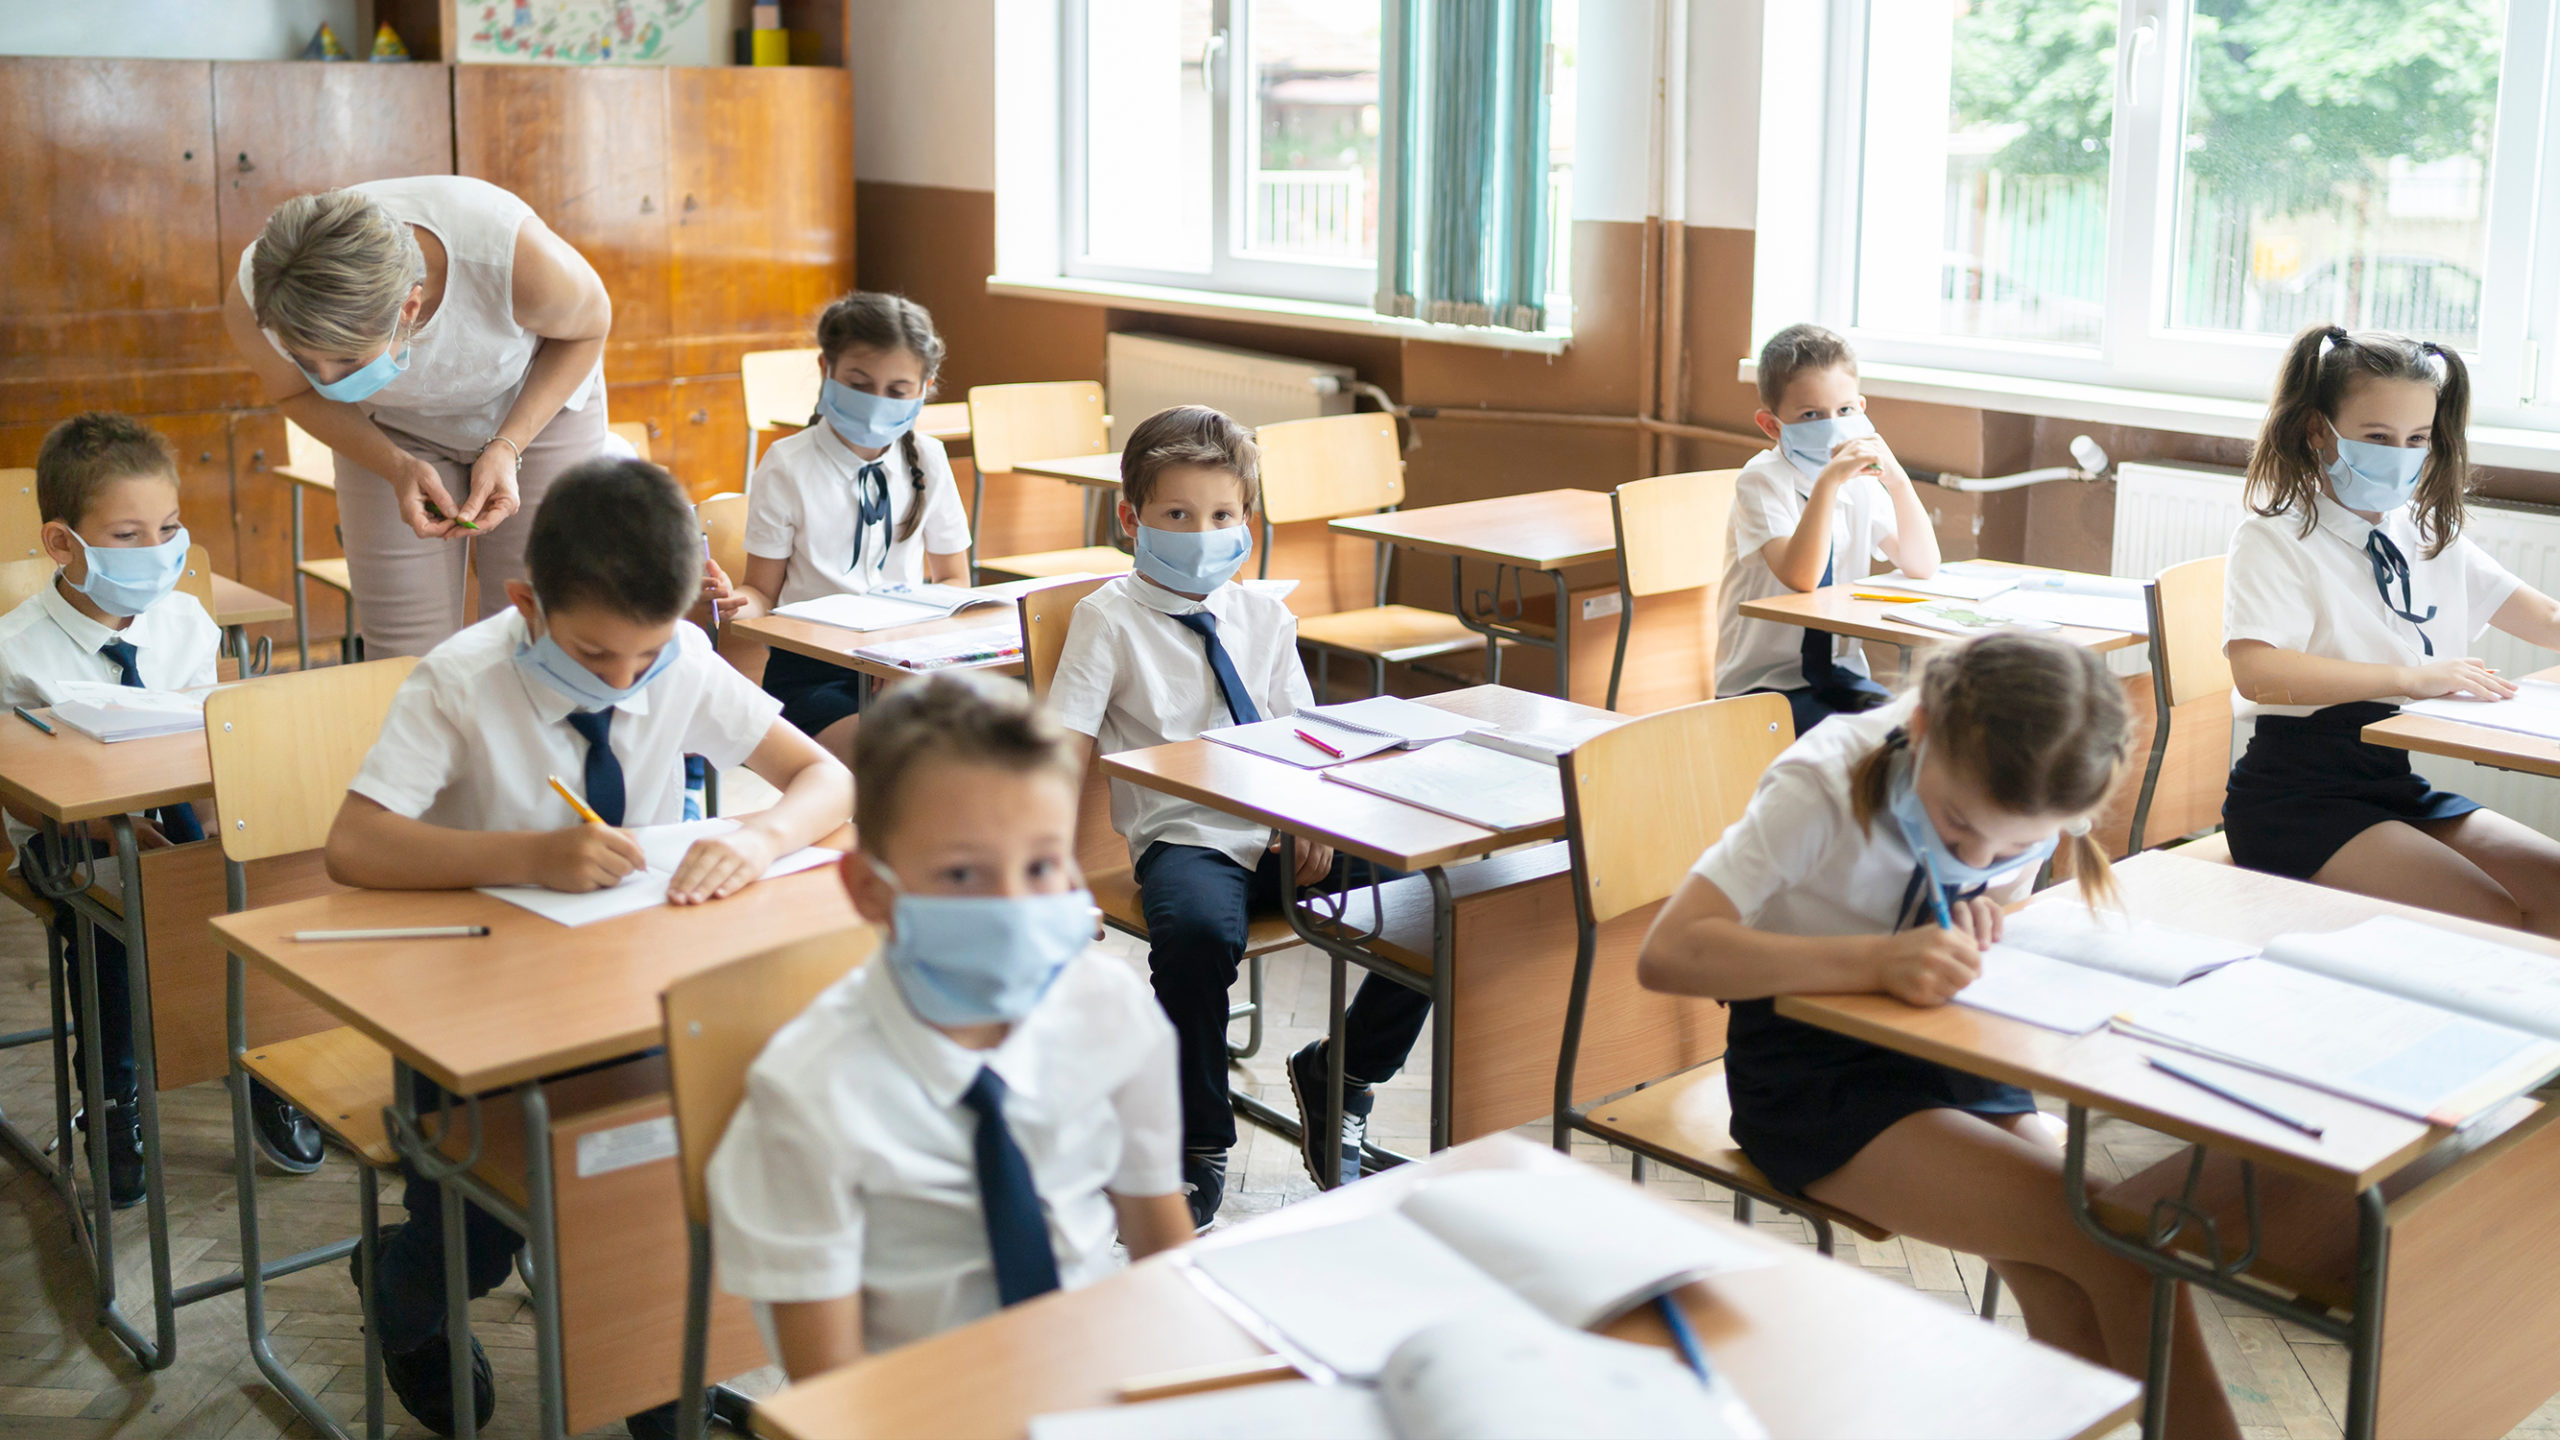 This is the best way to reduce coronavirus outbreaks in schools